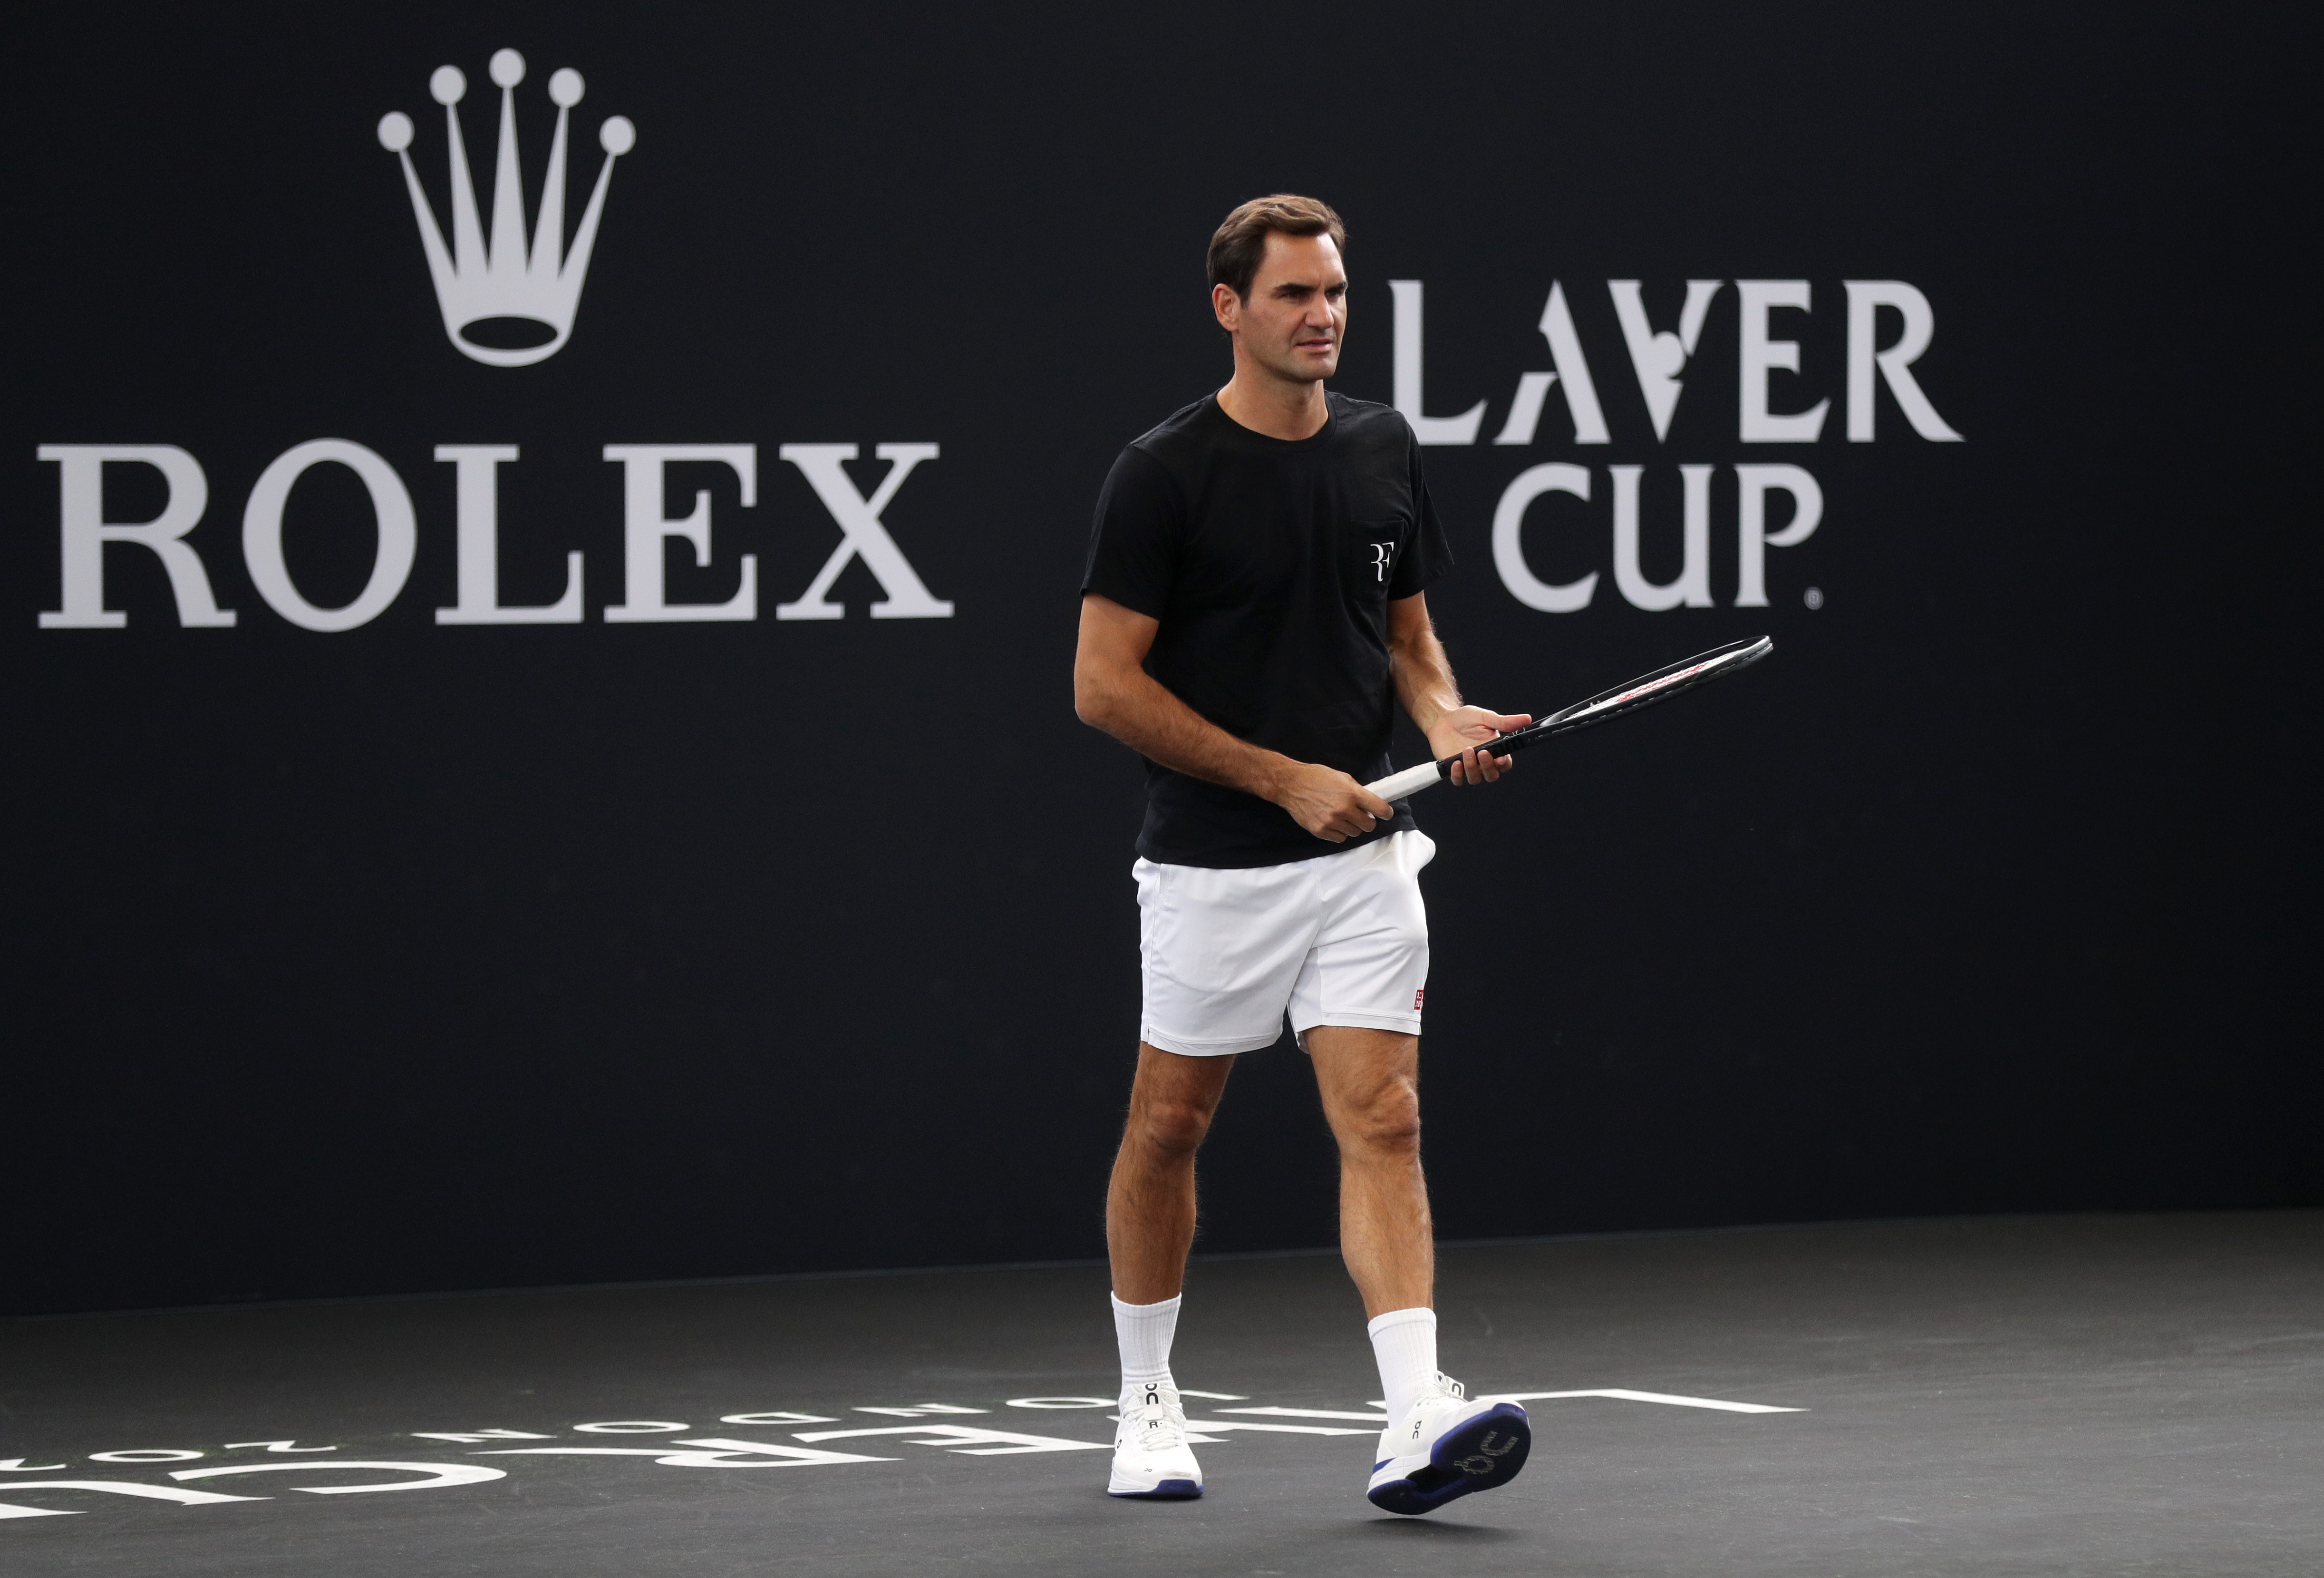 How to watch Roger Federer at Laver Cup 2022